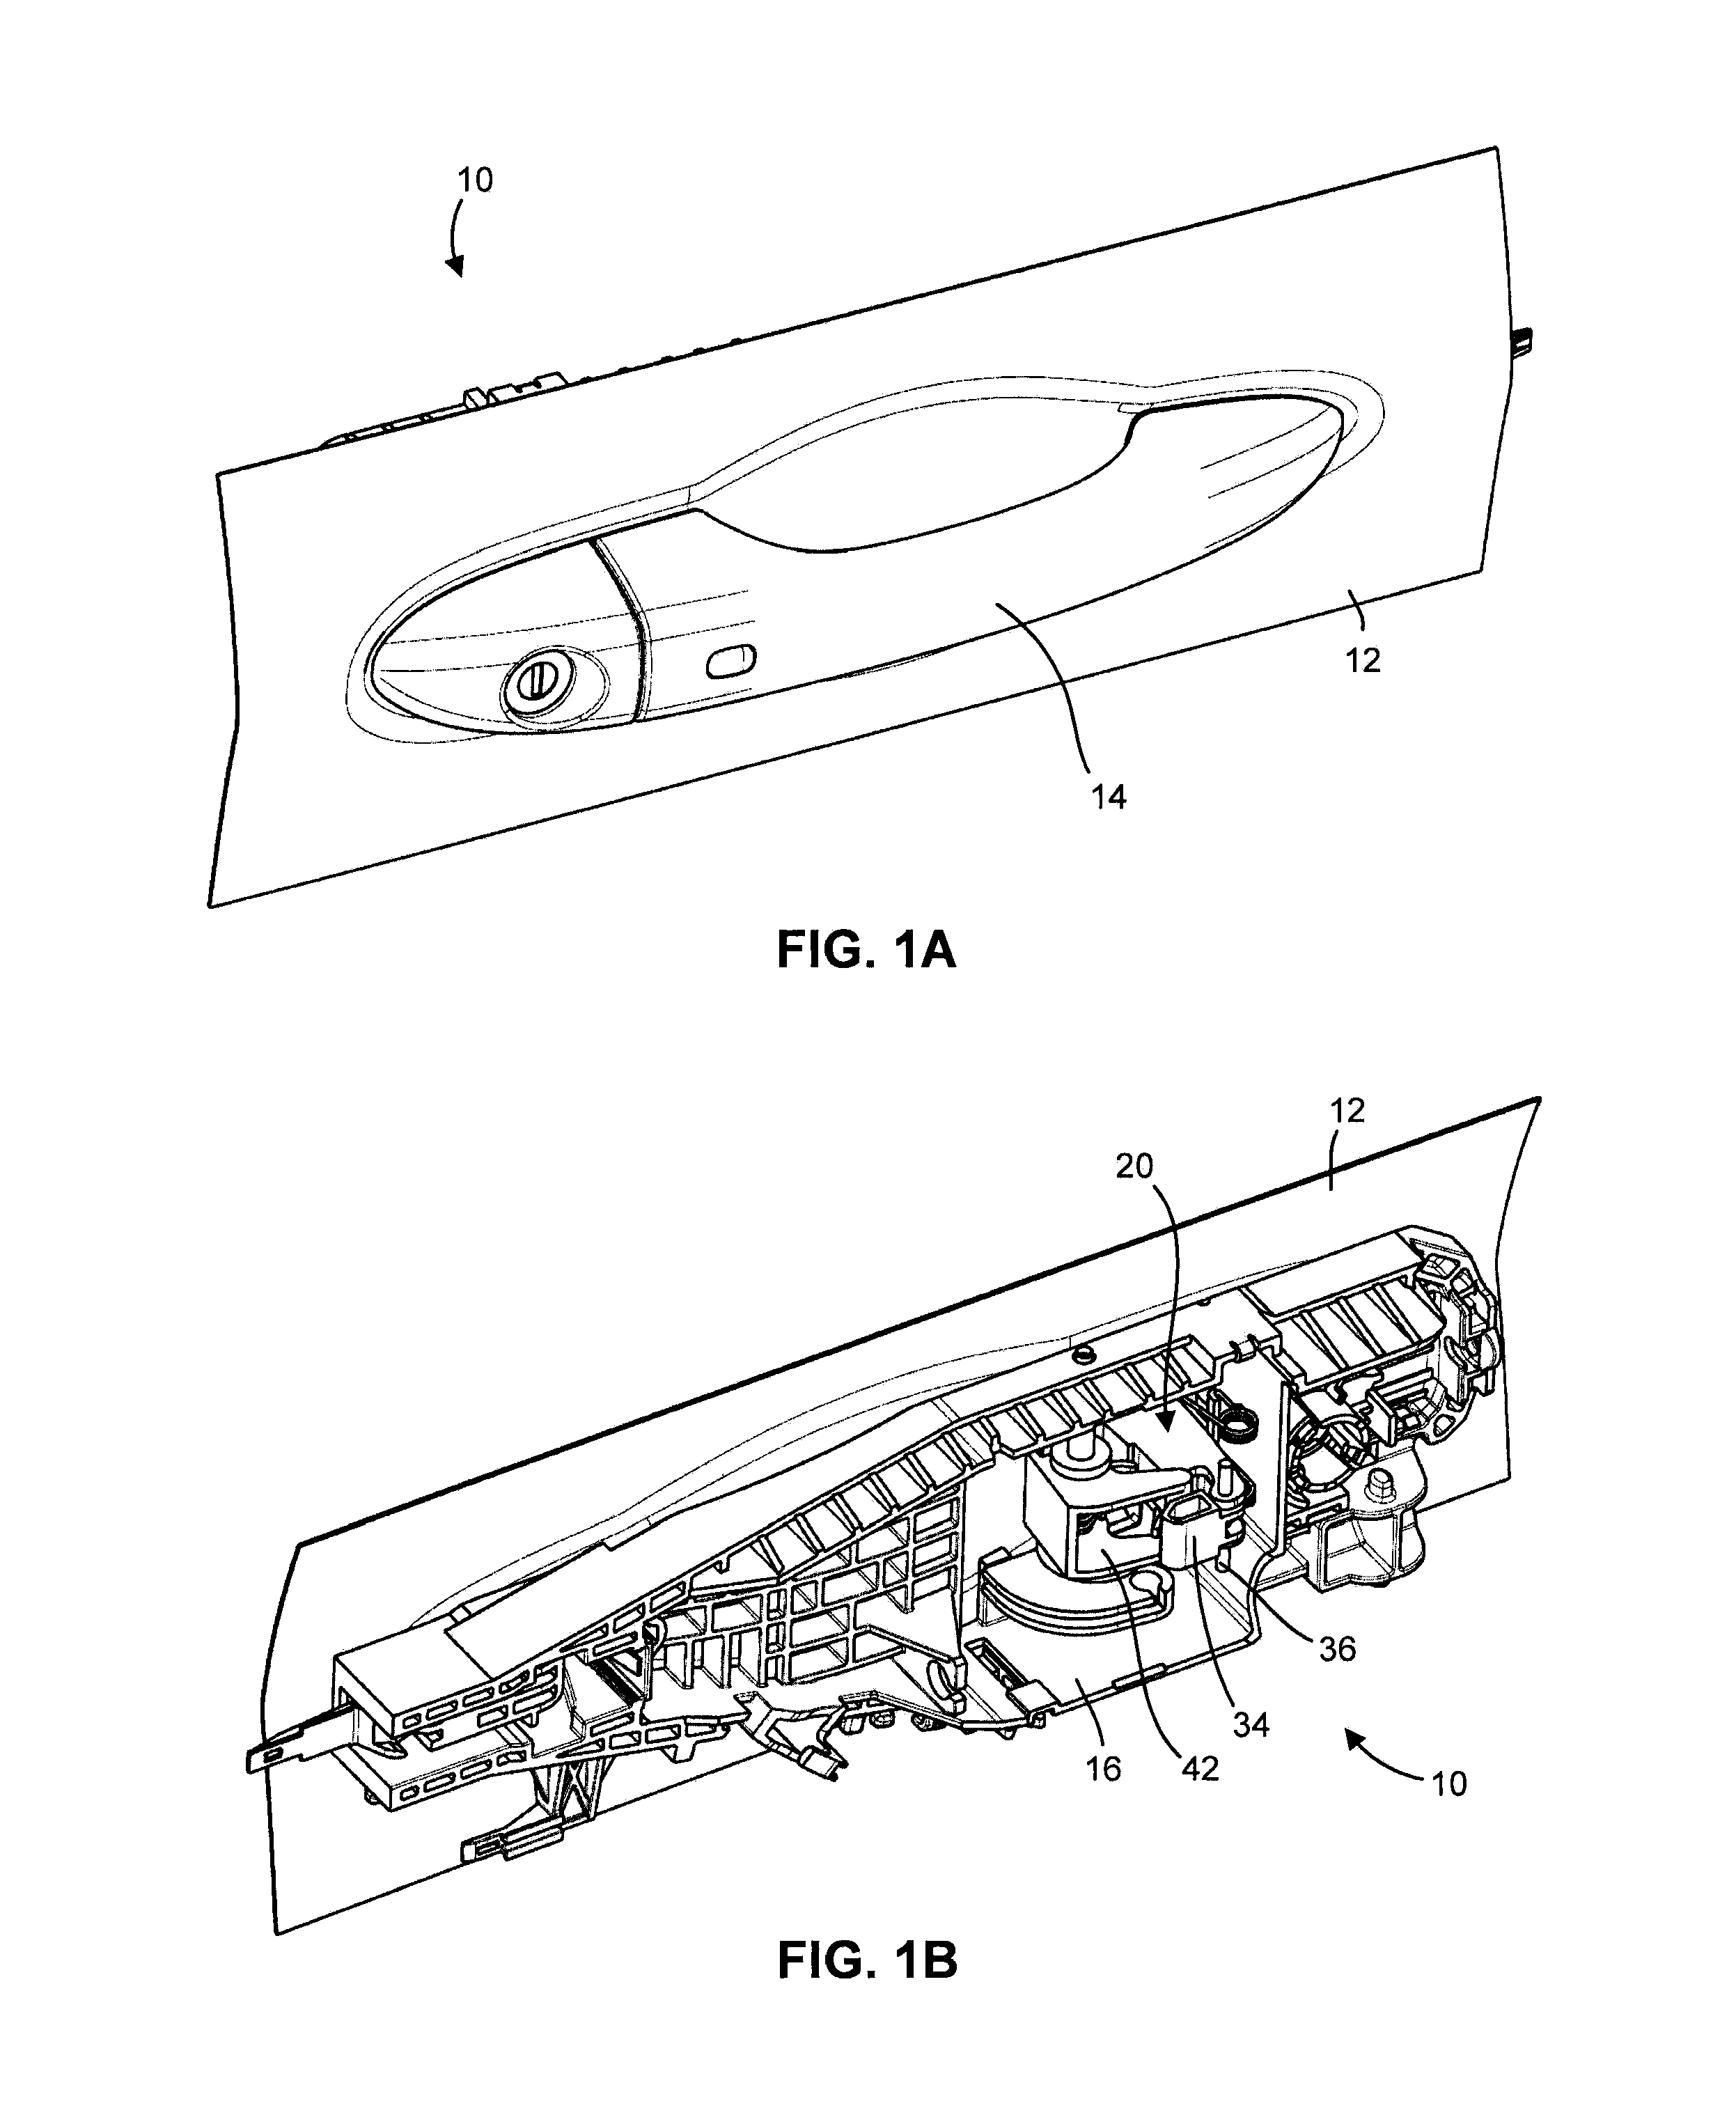 Vehicular door handle assembly with deployable latch connection